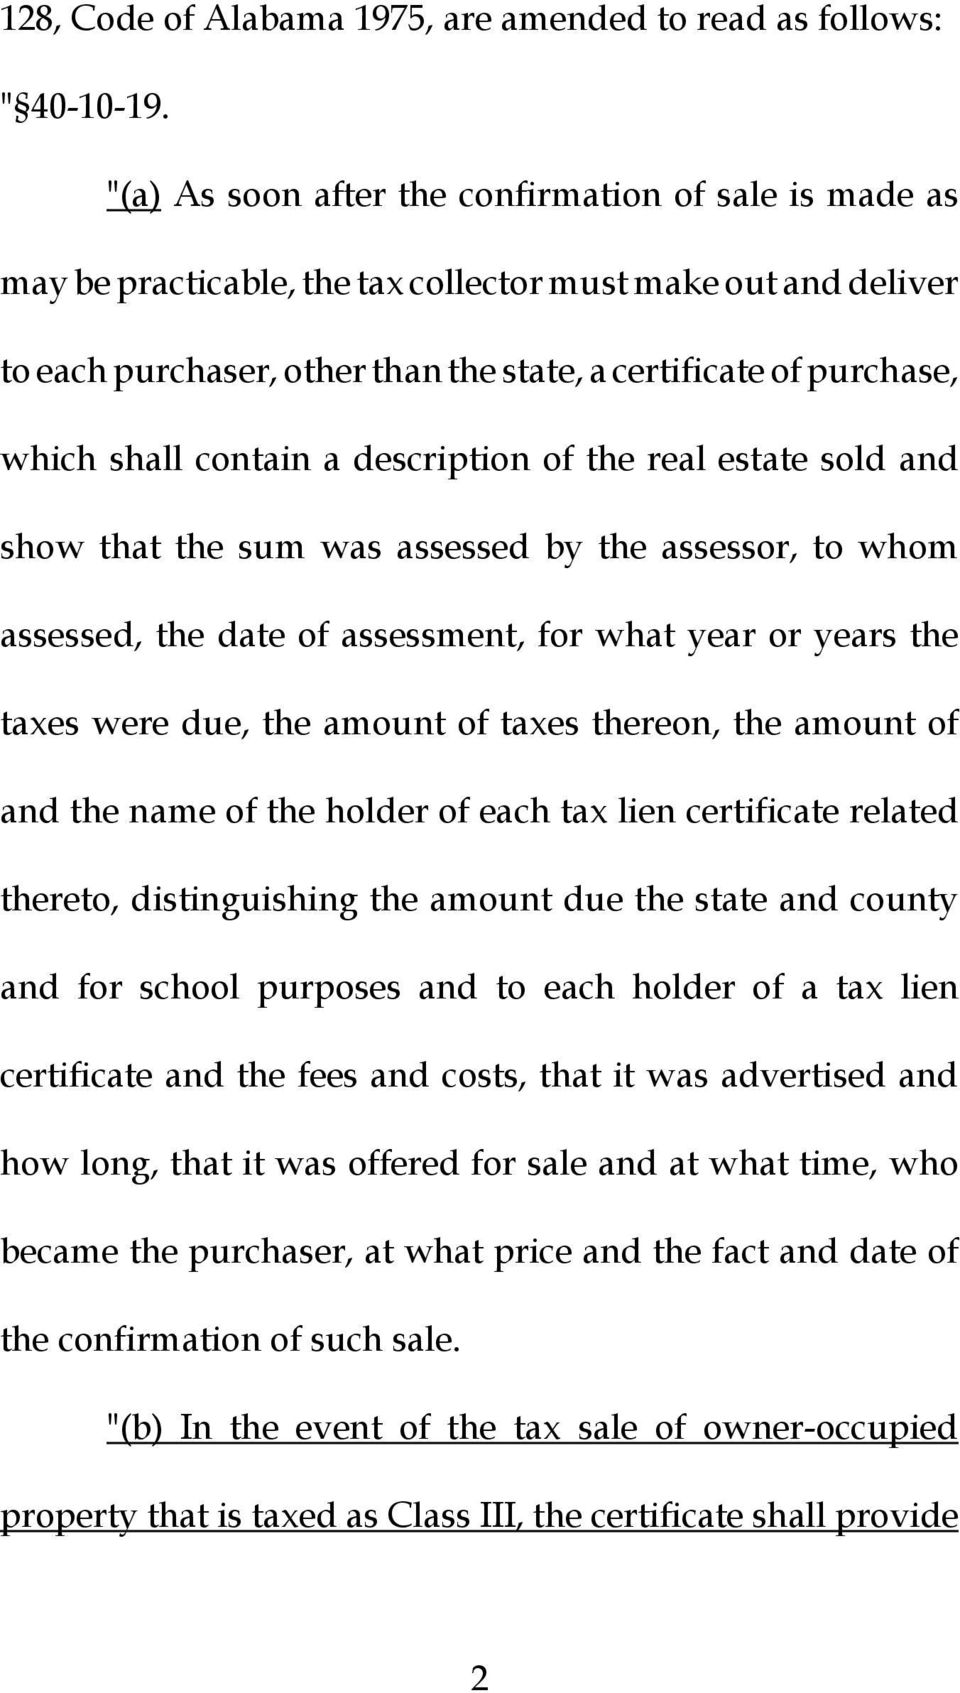 contain a description of the real estate sold and show that the sum was assessed by the assessor, to whom assessed, the date of assessment, for what year or years the taxes were due, the amount of